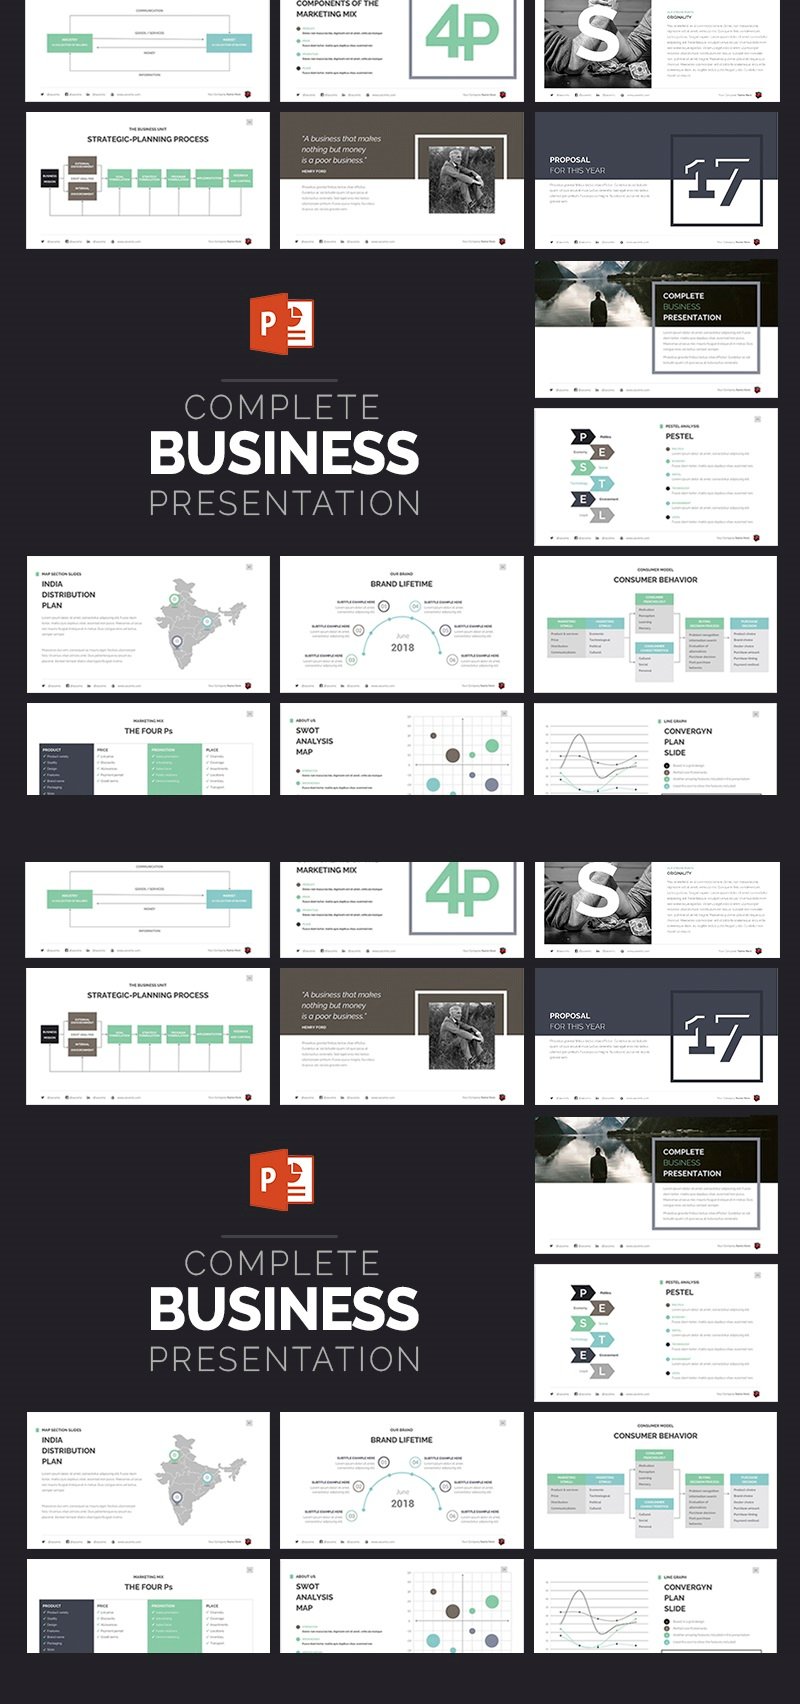 Complete Business Presentation PowerPoint template